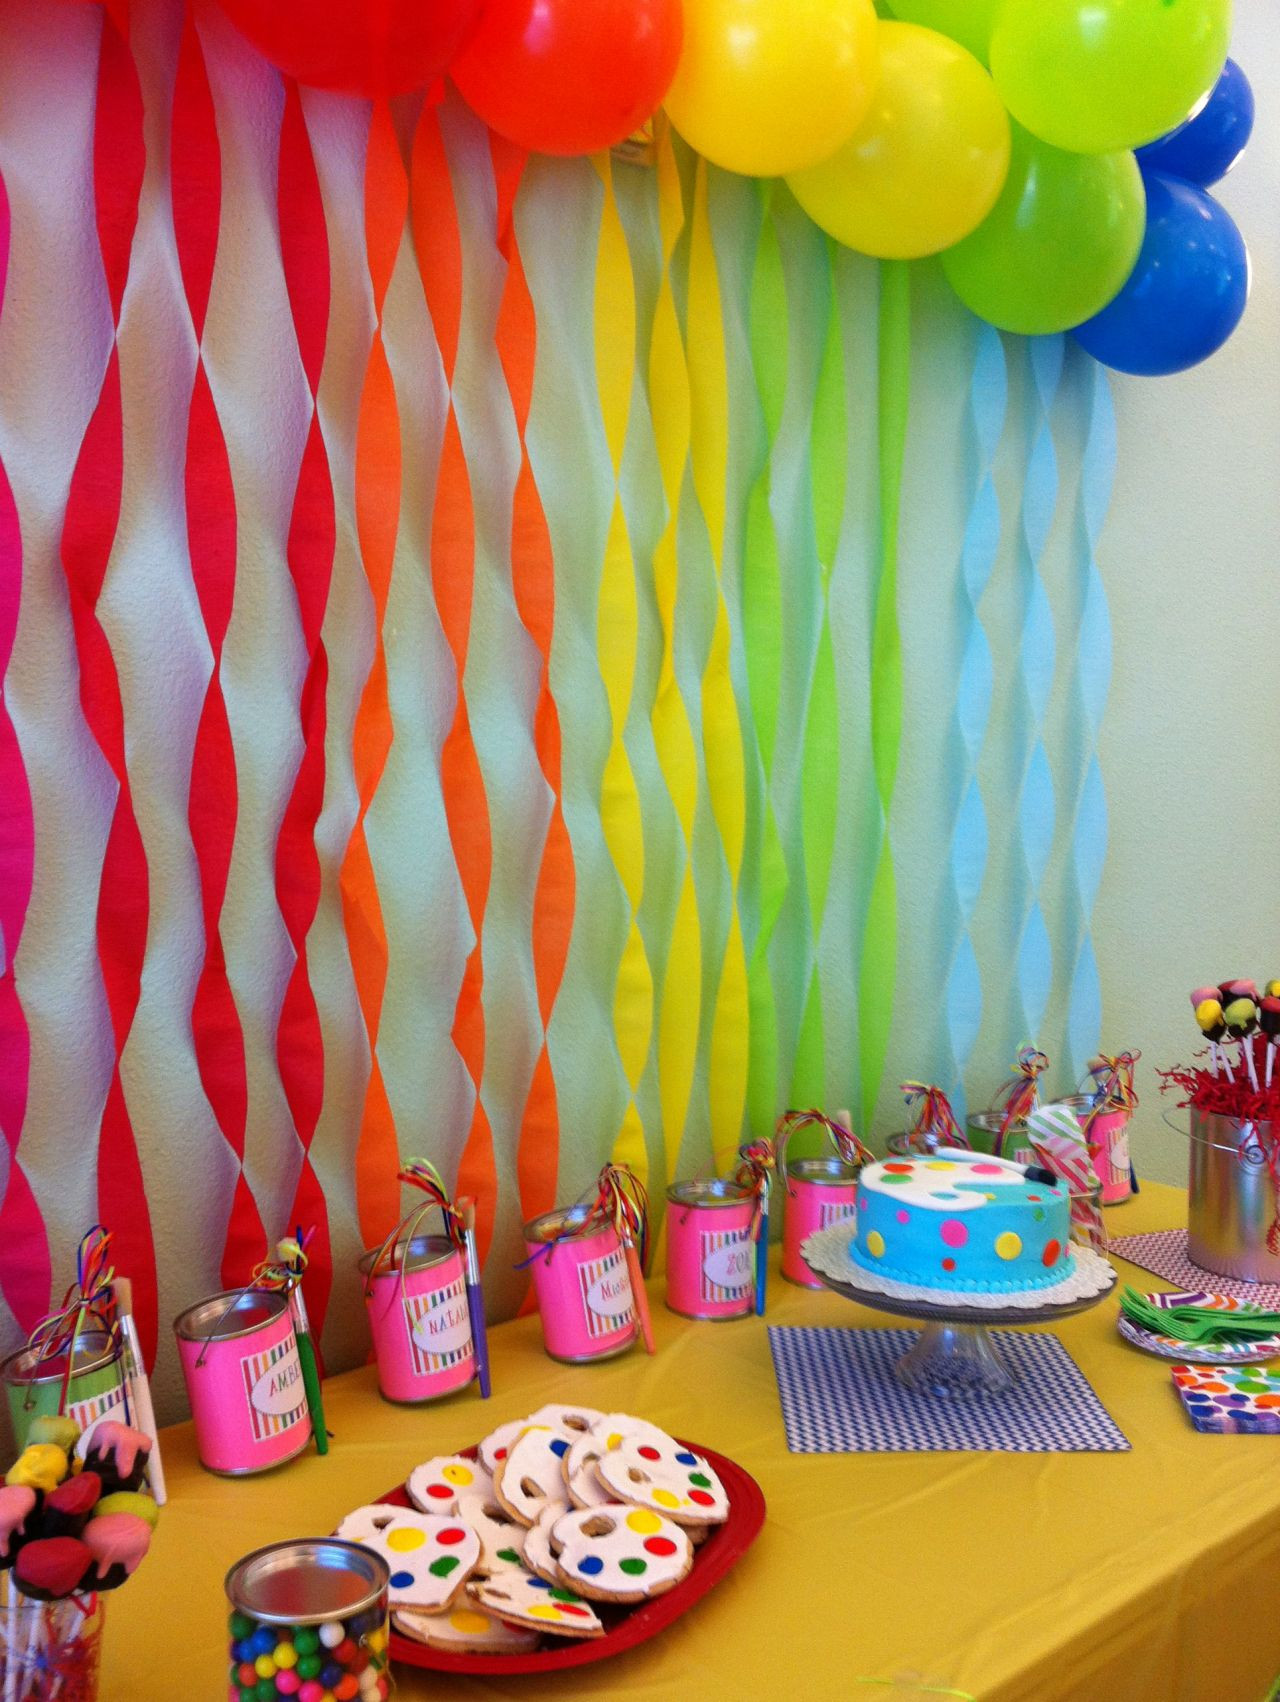 Summer Birthday Party Ideas For 4 Year Old Boy
 Get These 12 of 4 Year Old Boy Birthday Party Ideas